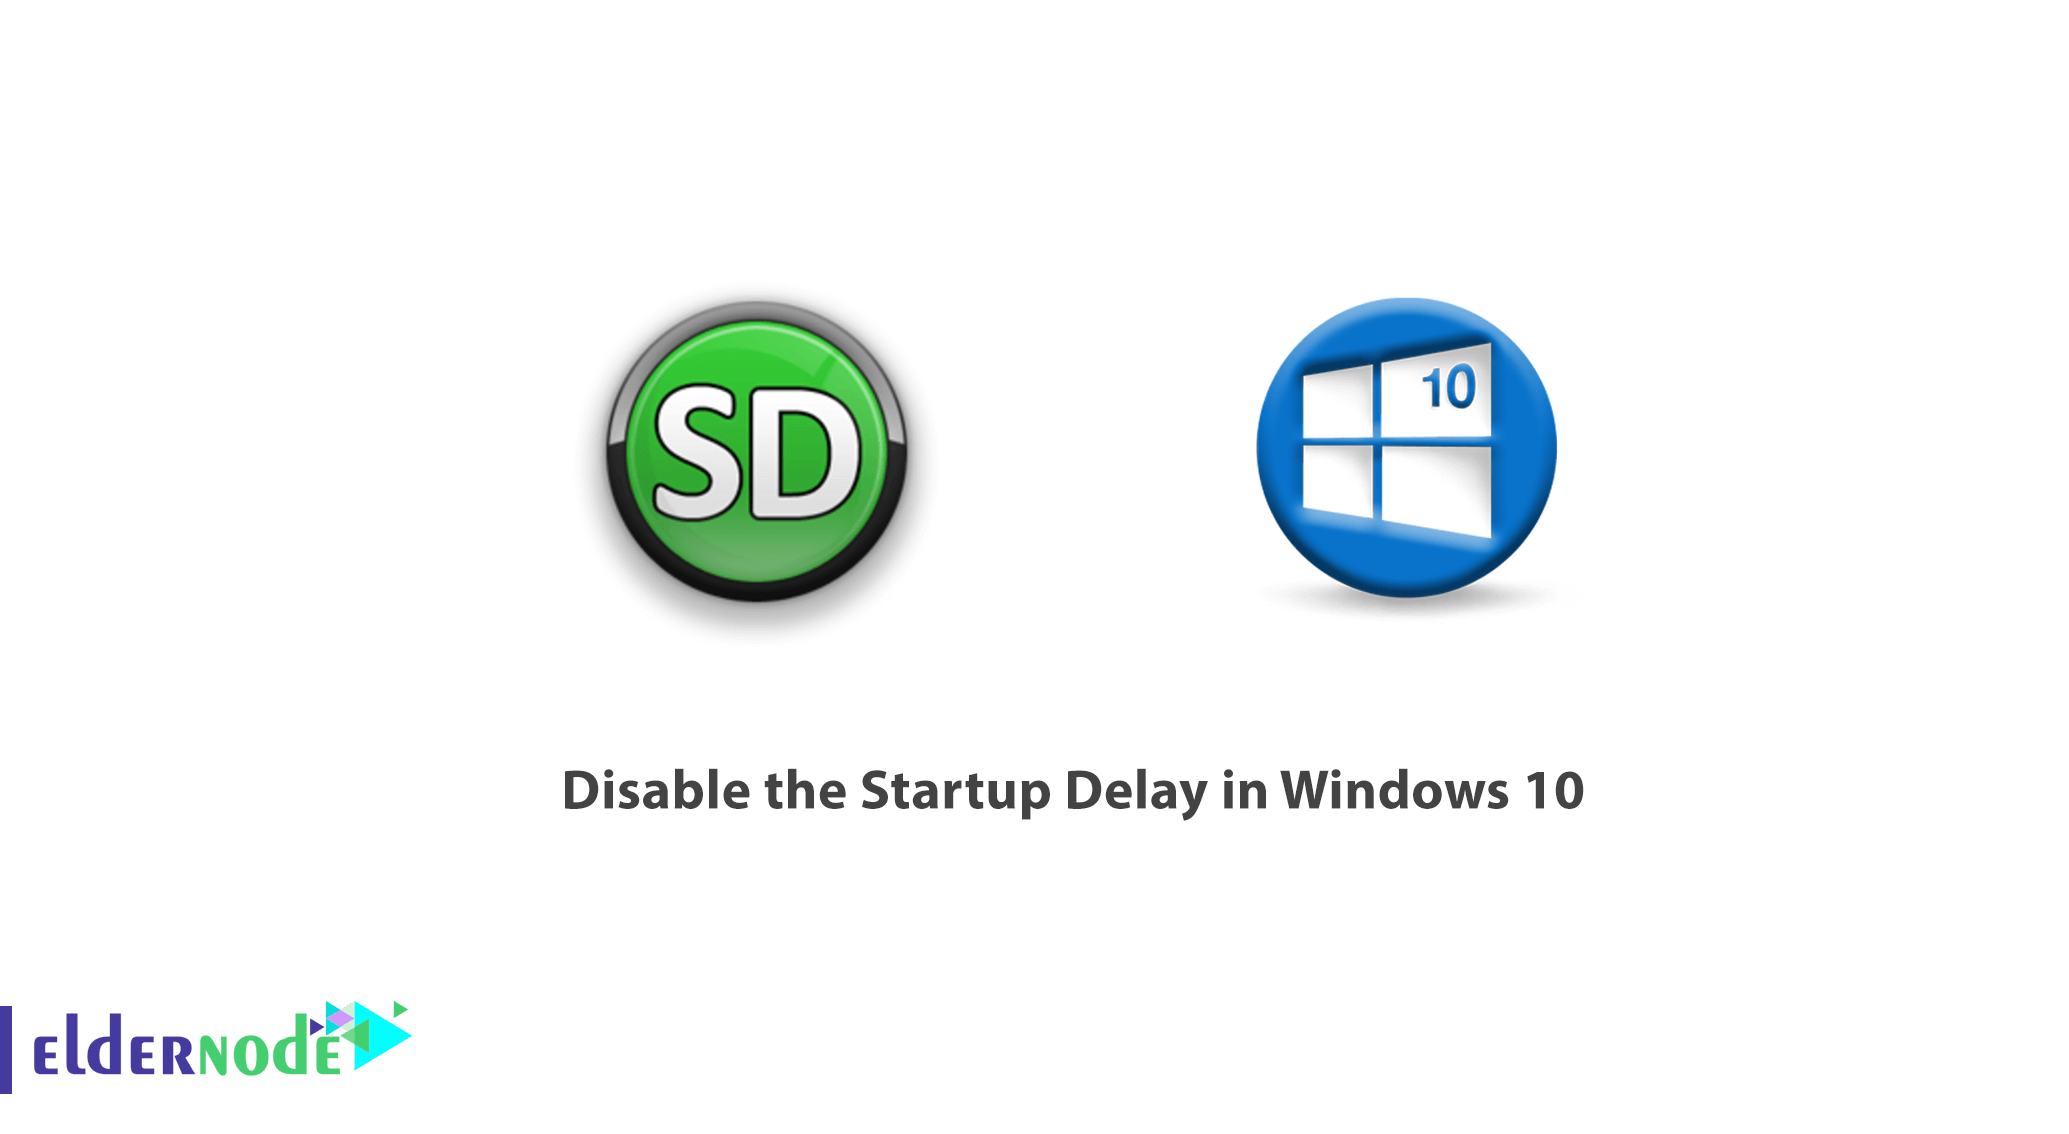 How to Disable the Startup Delay in Windows 10